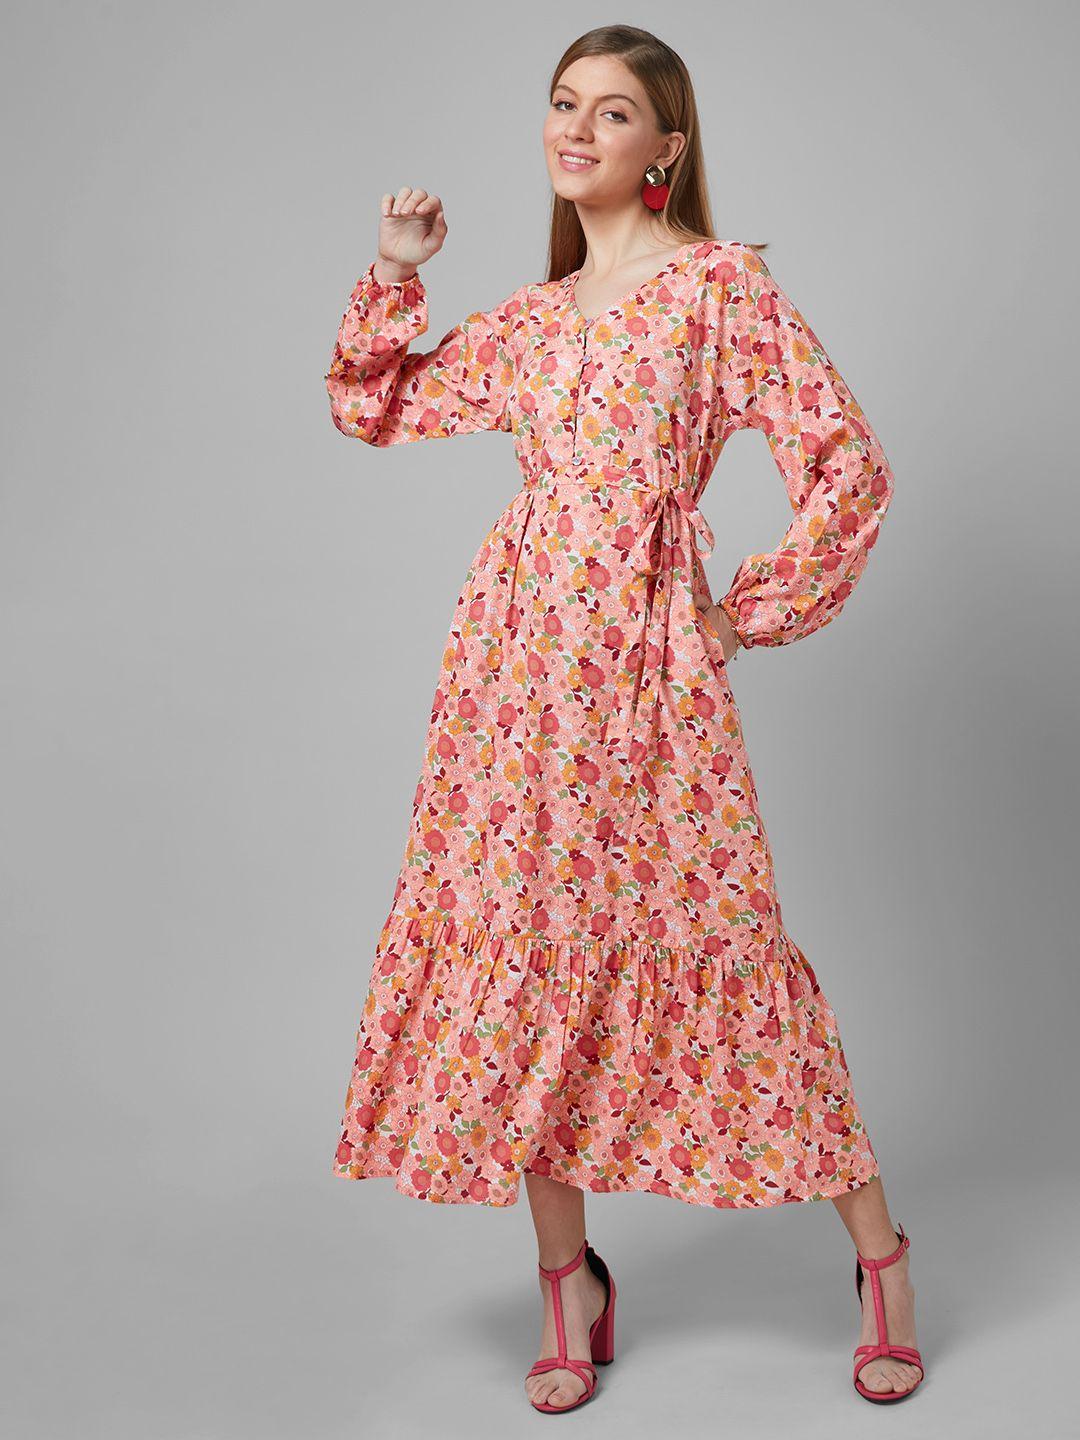 style quotient floral layered a-line midi dress